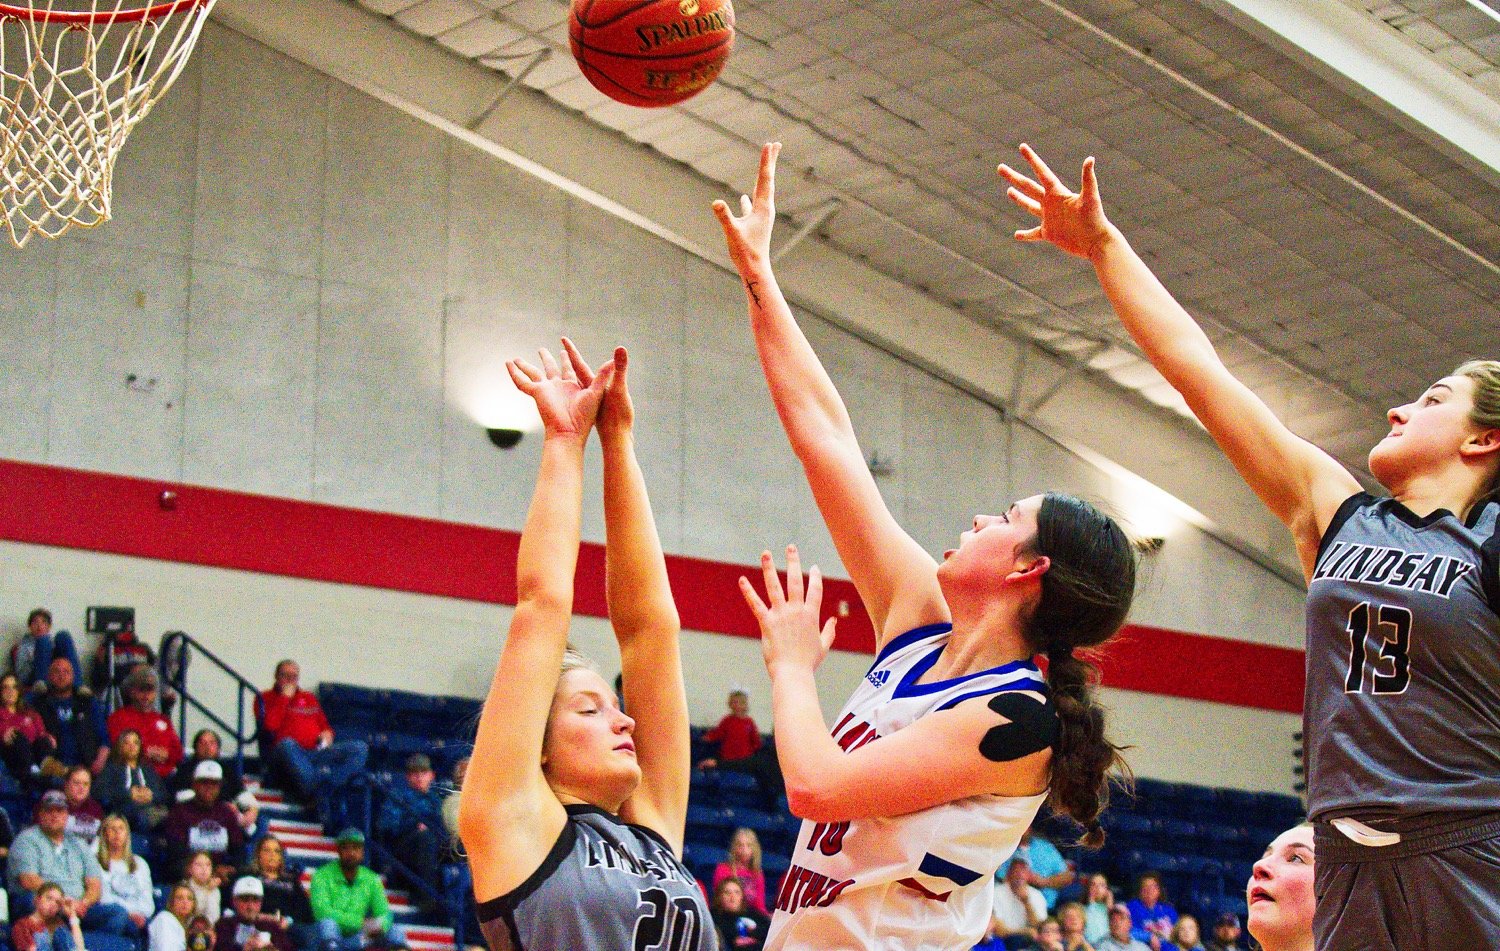 Autumn Whitten fires a contested jumper from short range. [see more shots, score prints]